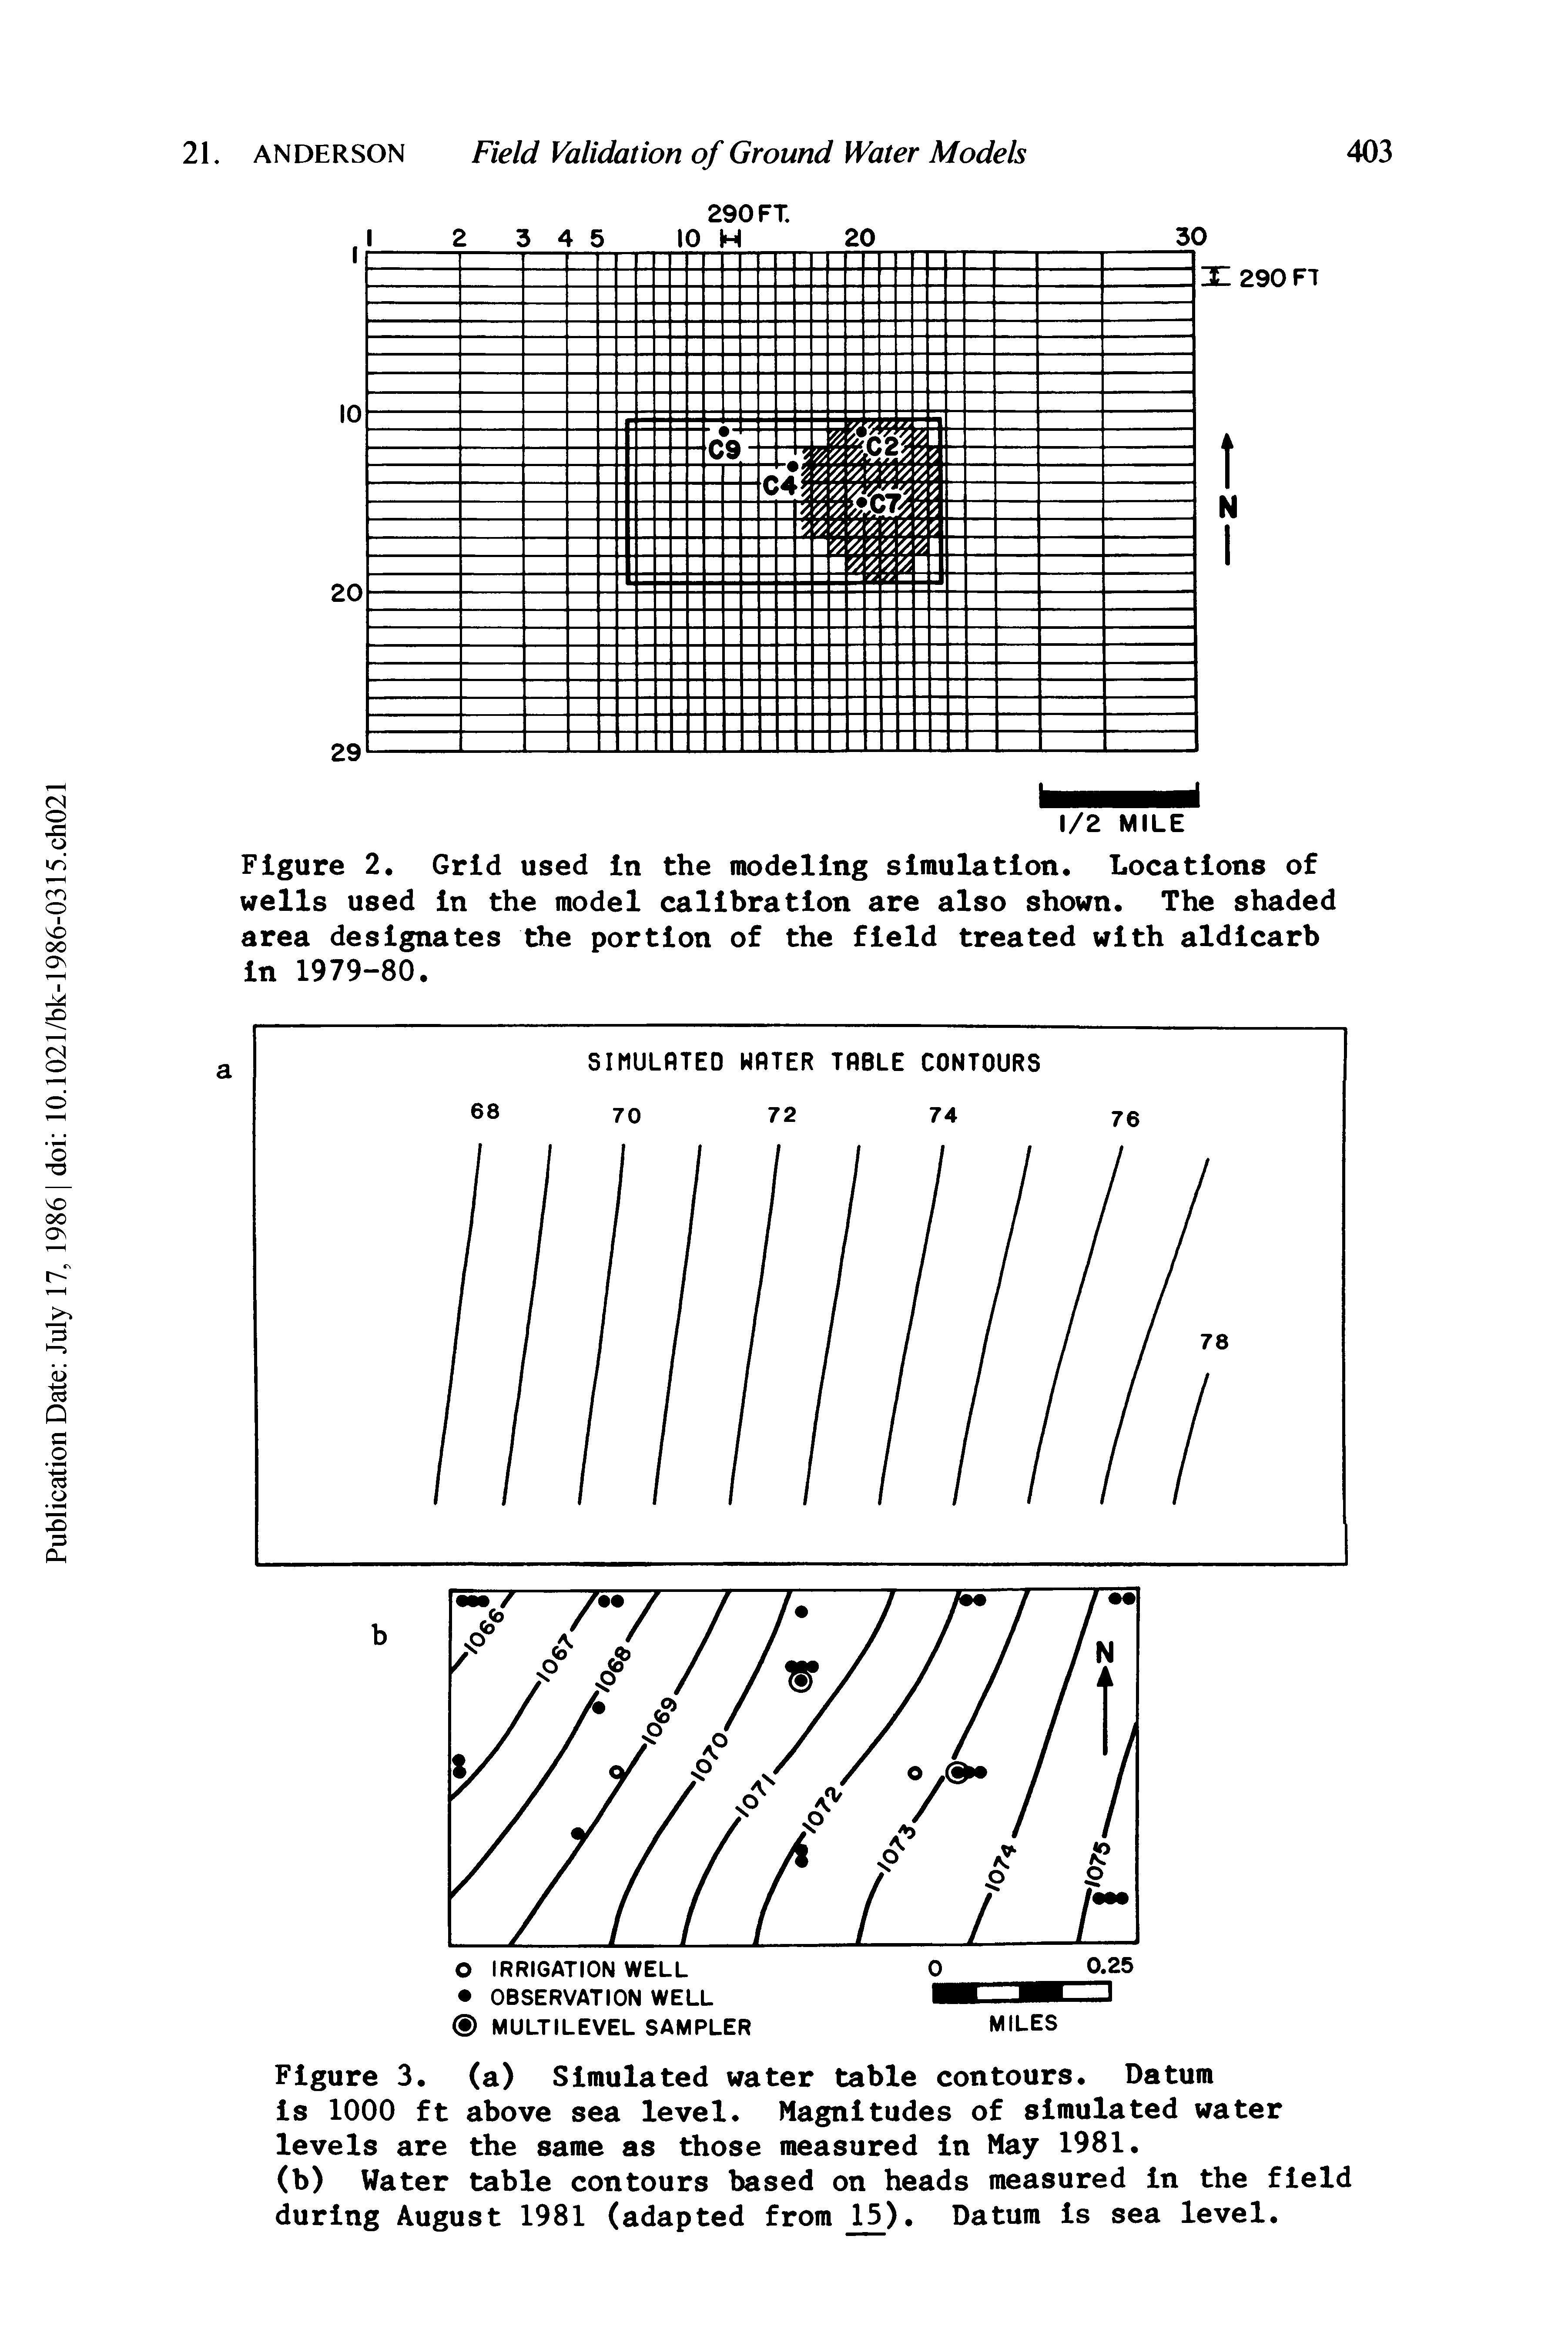 Figure 2, Grid used in the modeling simulation. Locations of wells used in the model calibration are also shown. The shaded area designates the portion of the field treated with aldicarb in 1979-80.